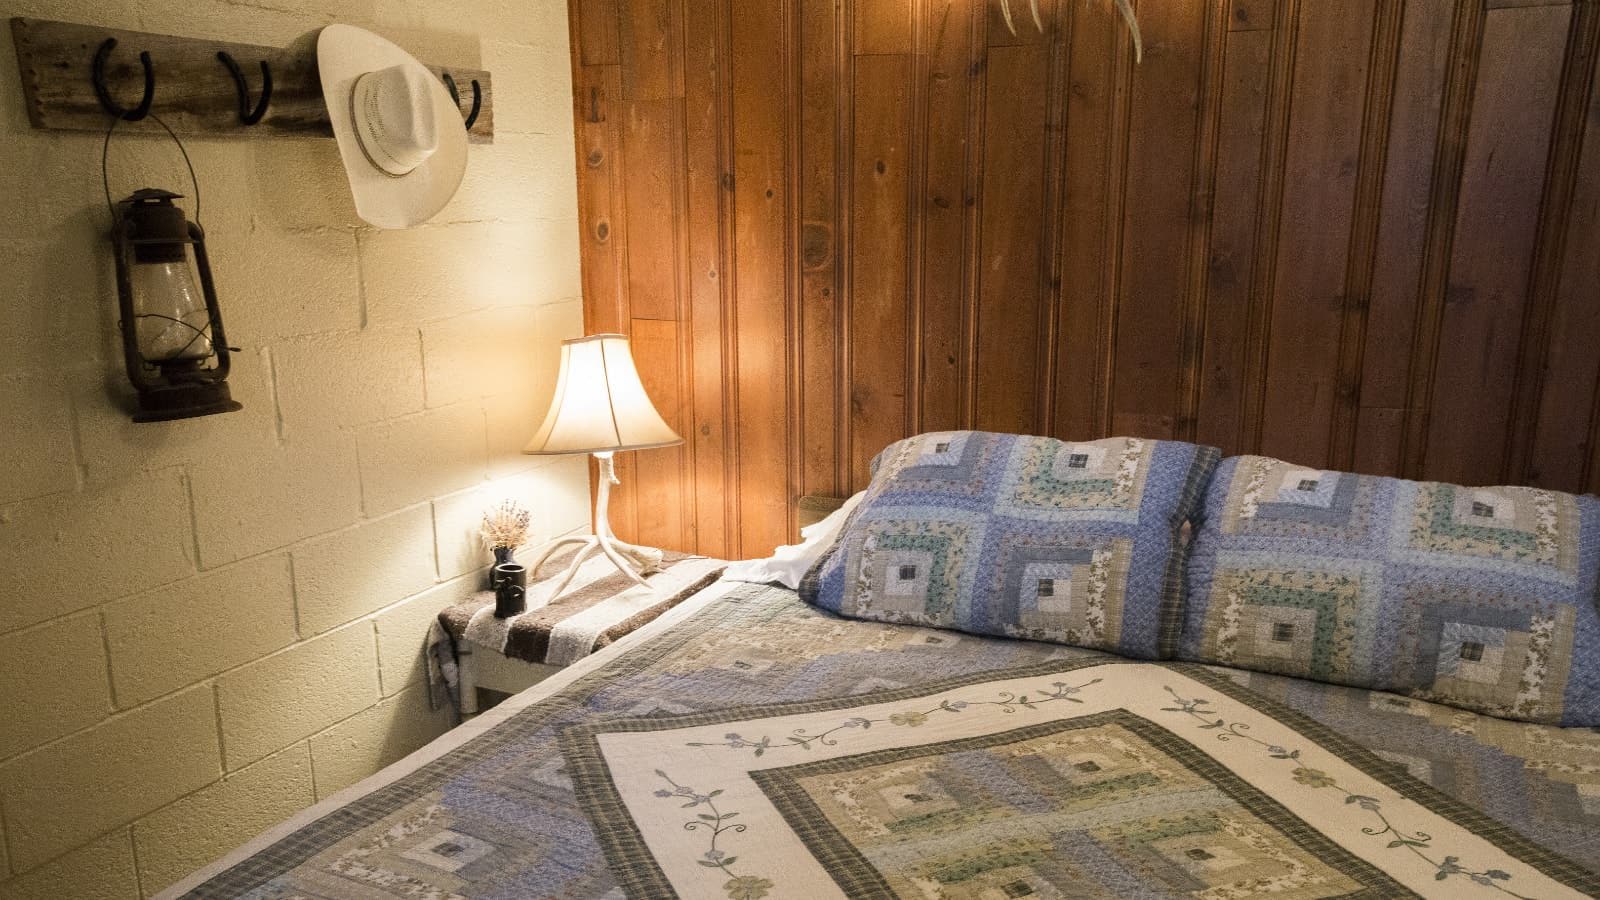 Bedroom with painted cinder block and wood paneling on the walls, multicolored bedding, and hat rack made of wood and horseshoes